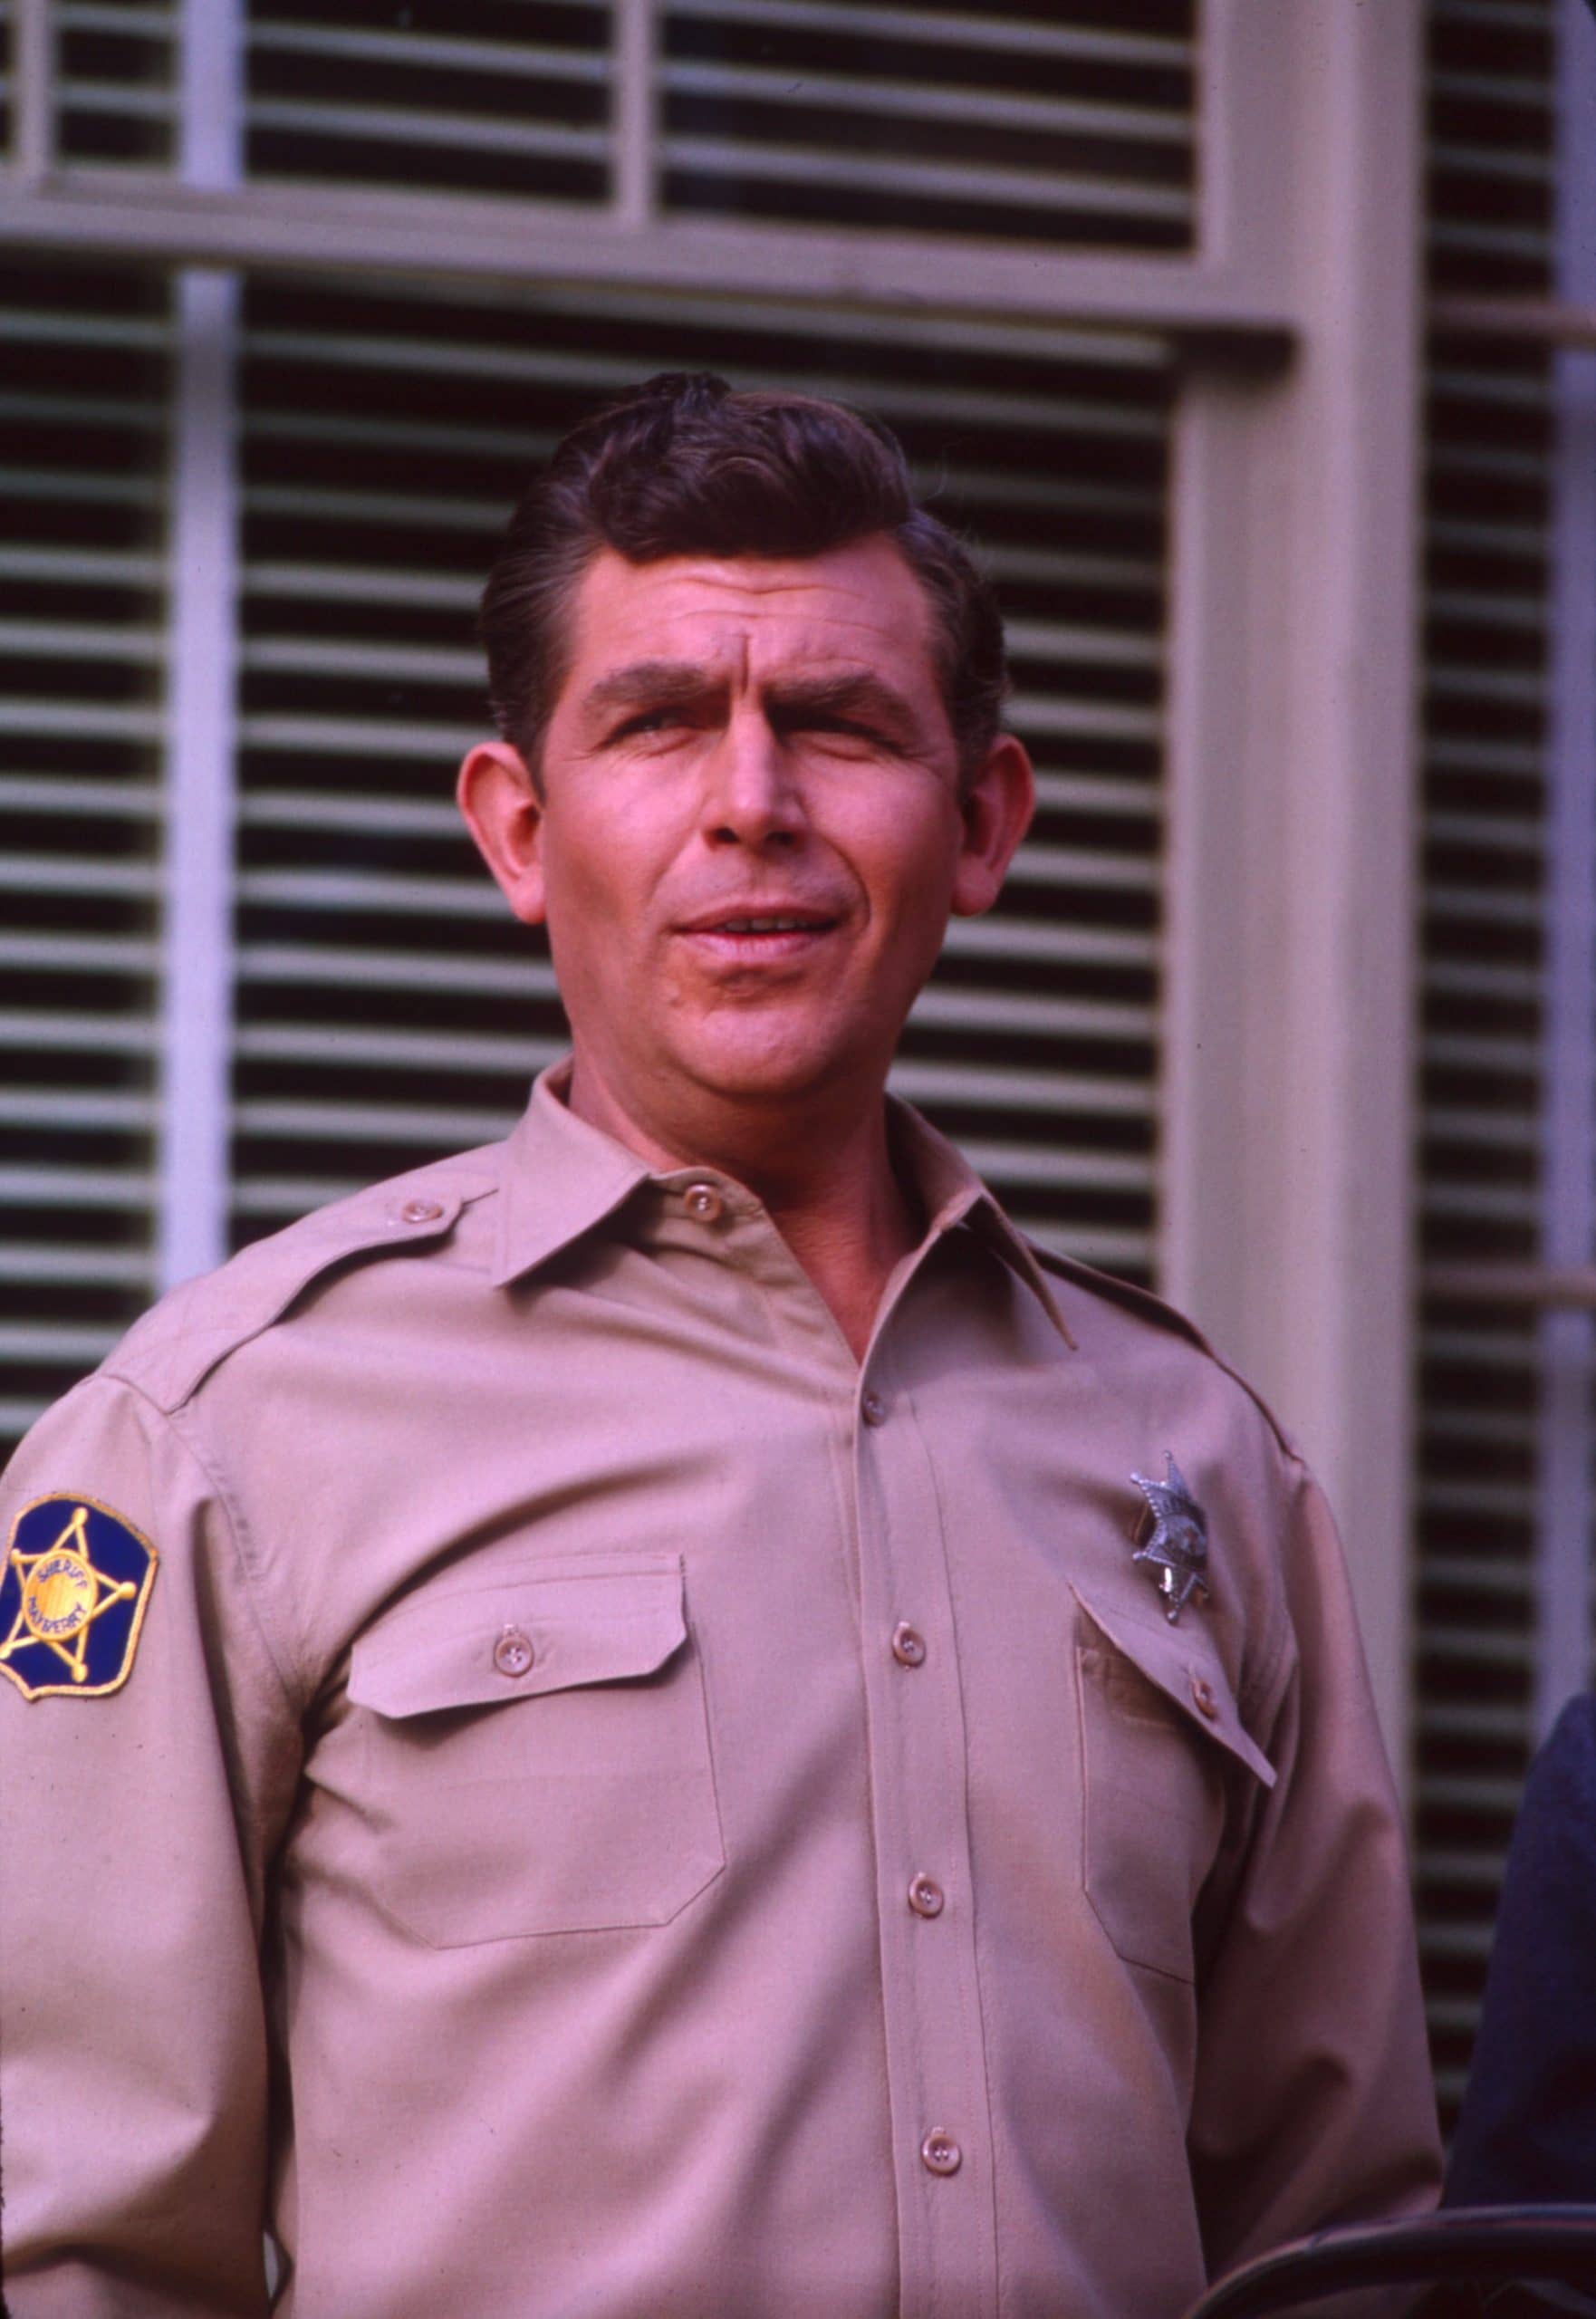 THE ANDY GRIFFITH SHOW, Andy Griffith, 1960-68